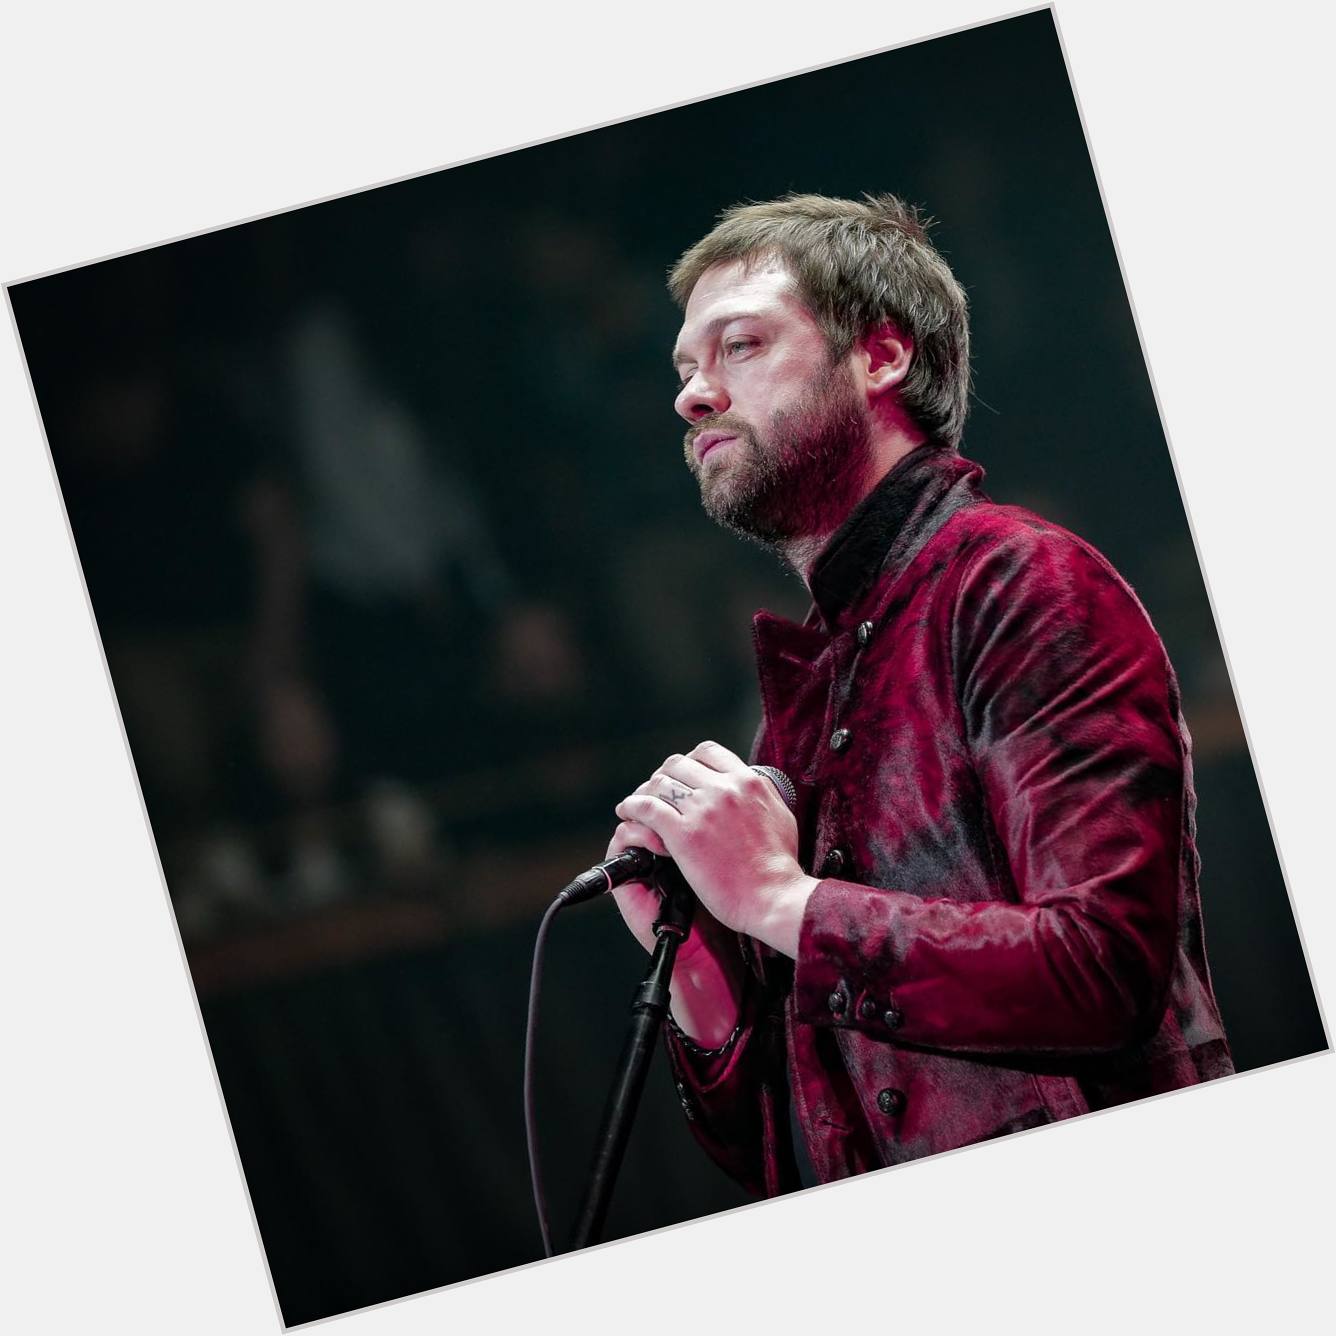 I wish a very happy birthday to Tom Meighan from !! I hope to see you live again. You rock, man!! 